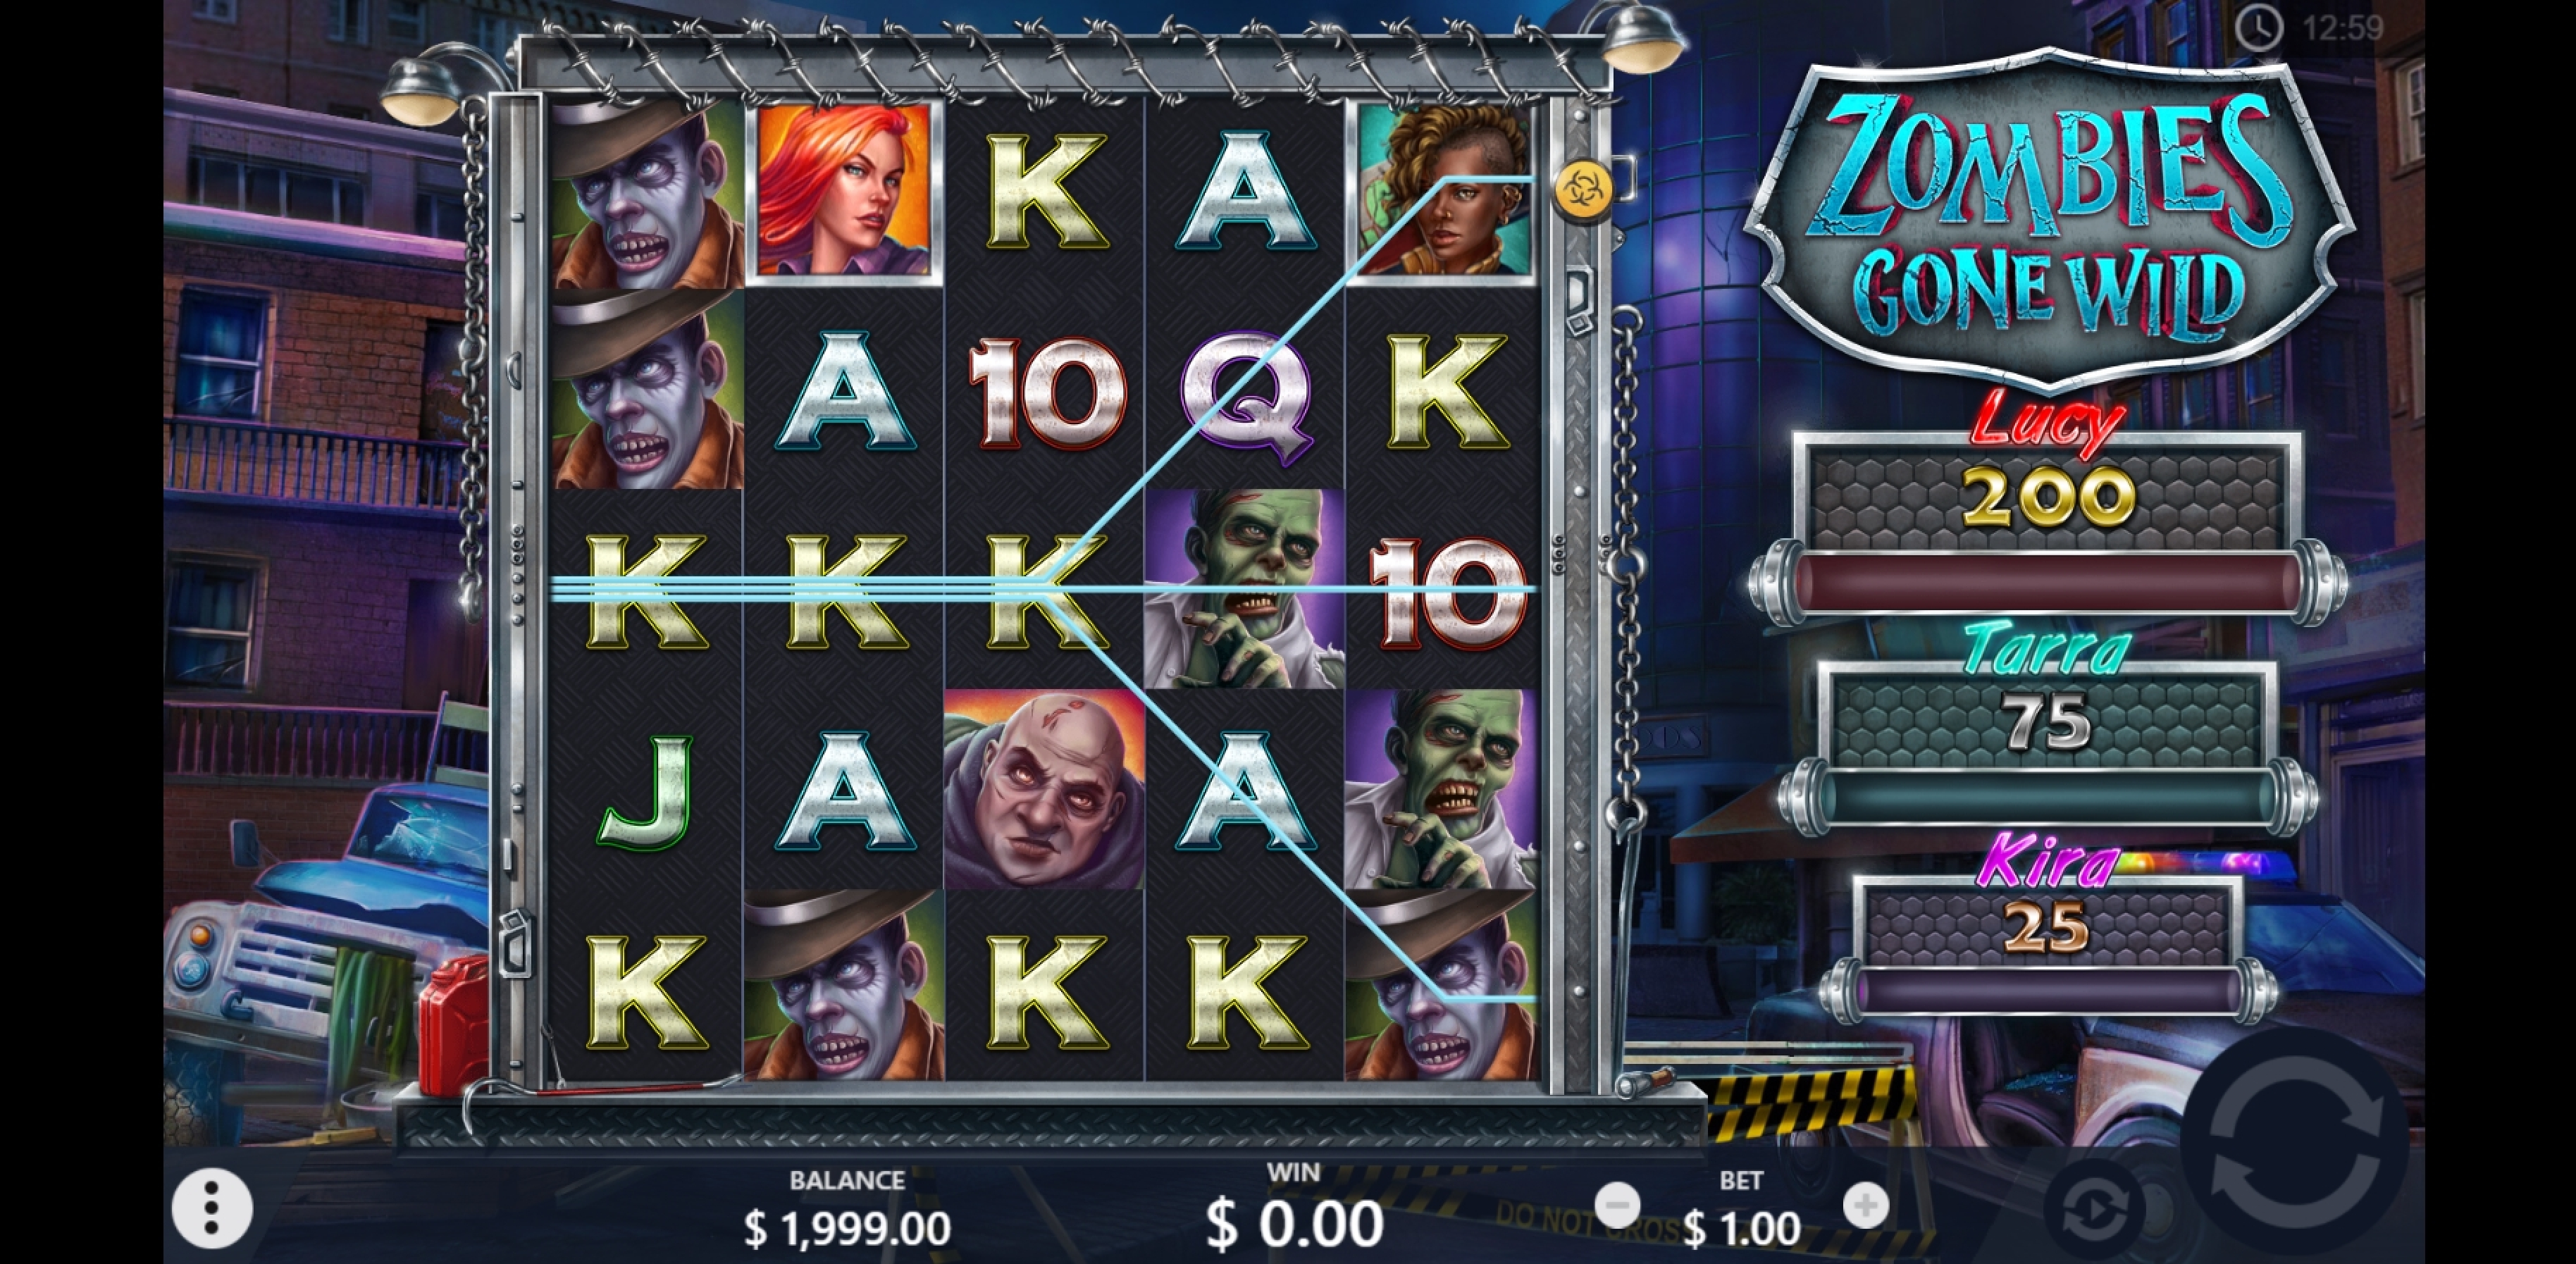 Win Money in Zombies Gone Wild Free Slot Game by PariPlay